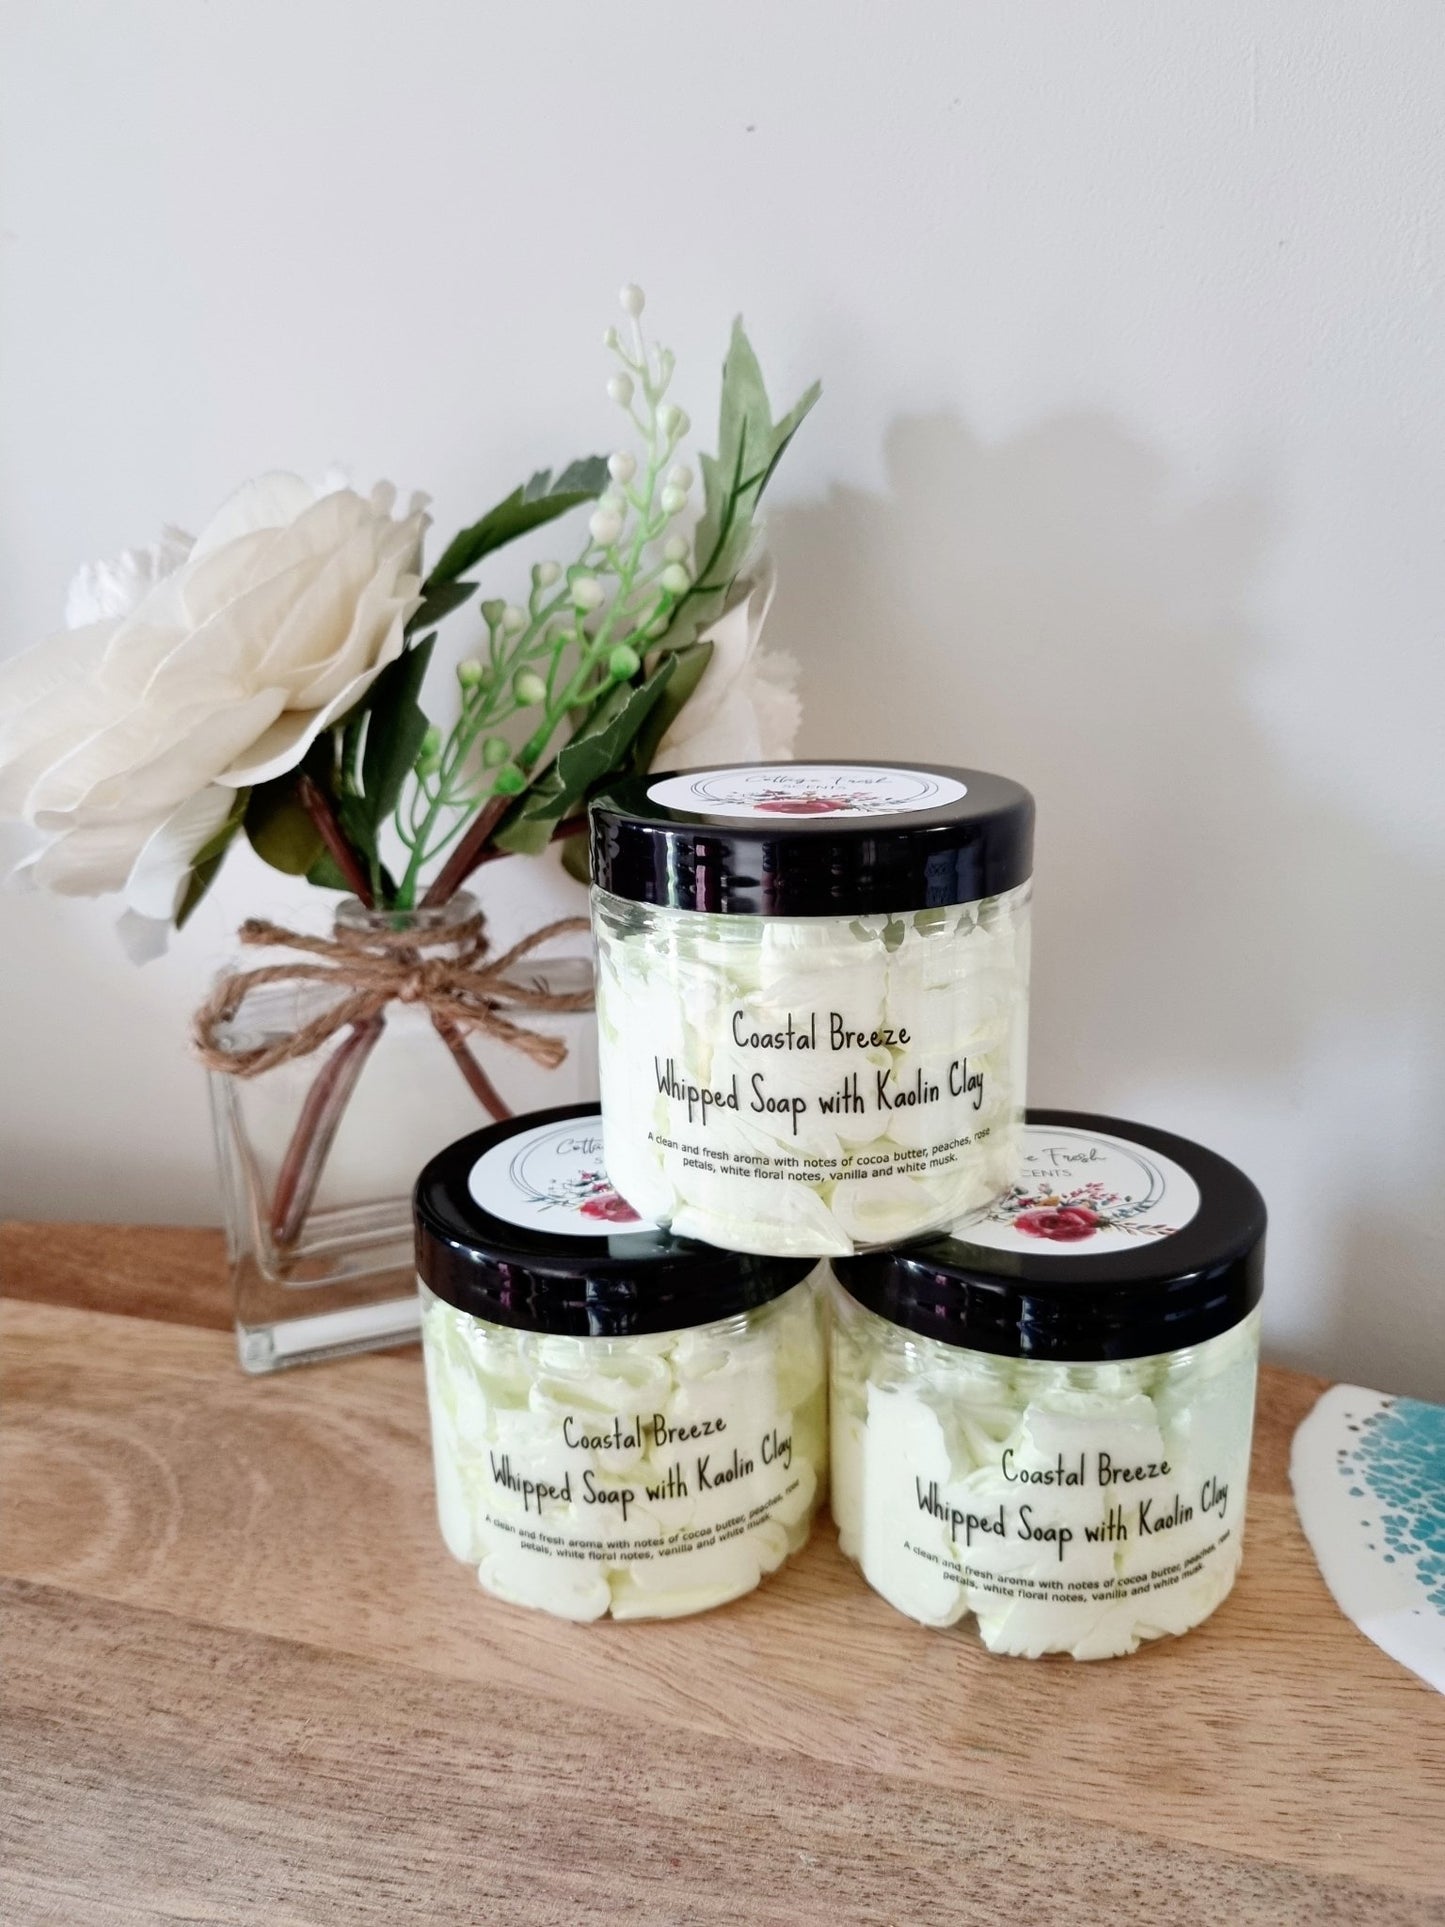 Coastal Breeze Whipped Soap - Whipped Soap - Cottage Fresh Scents